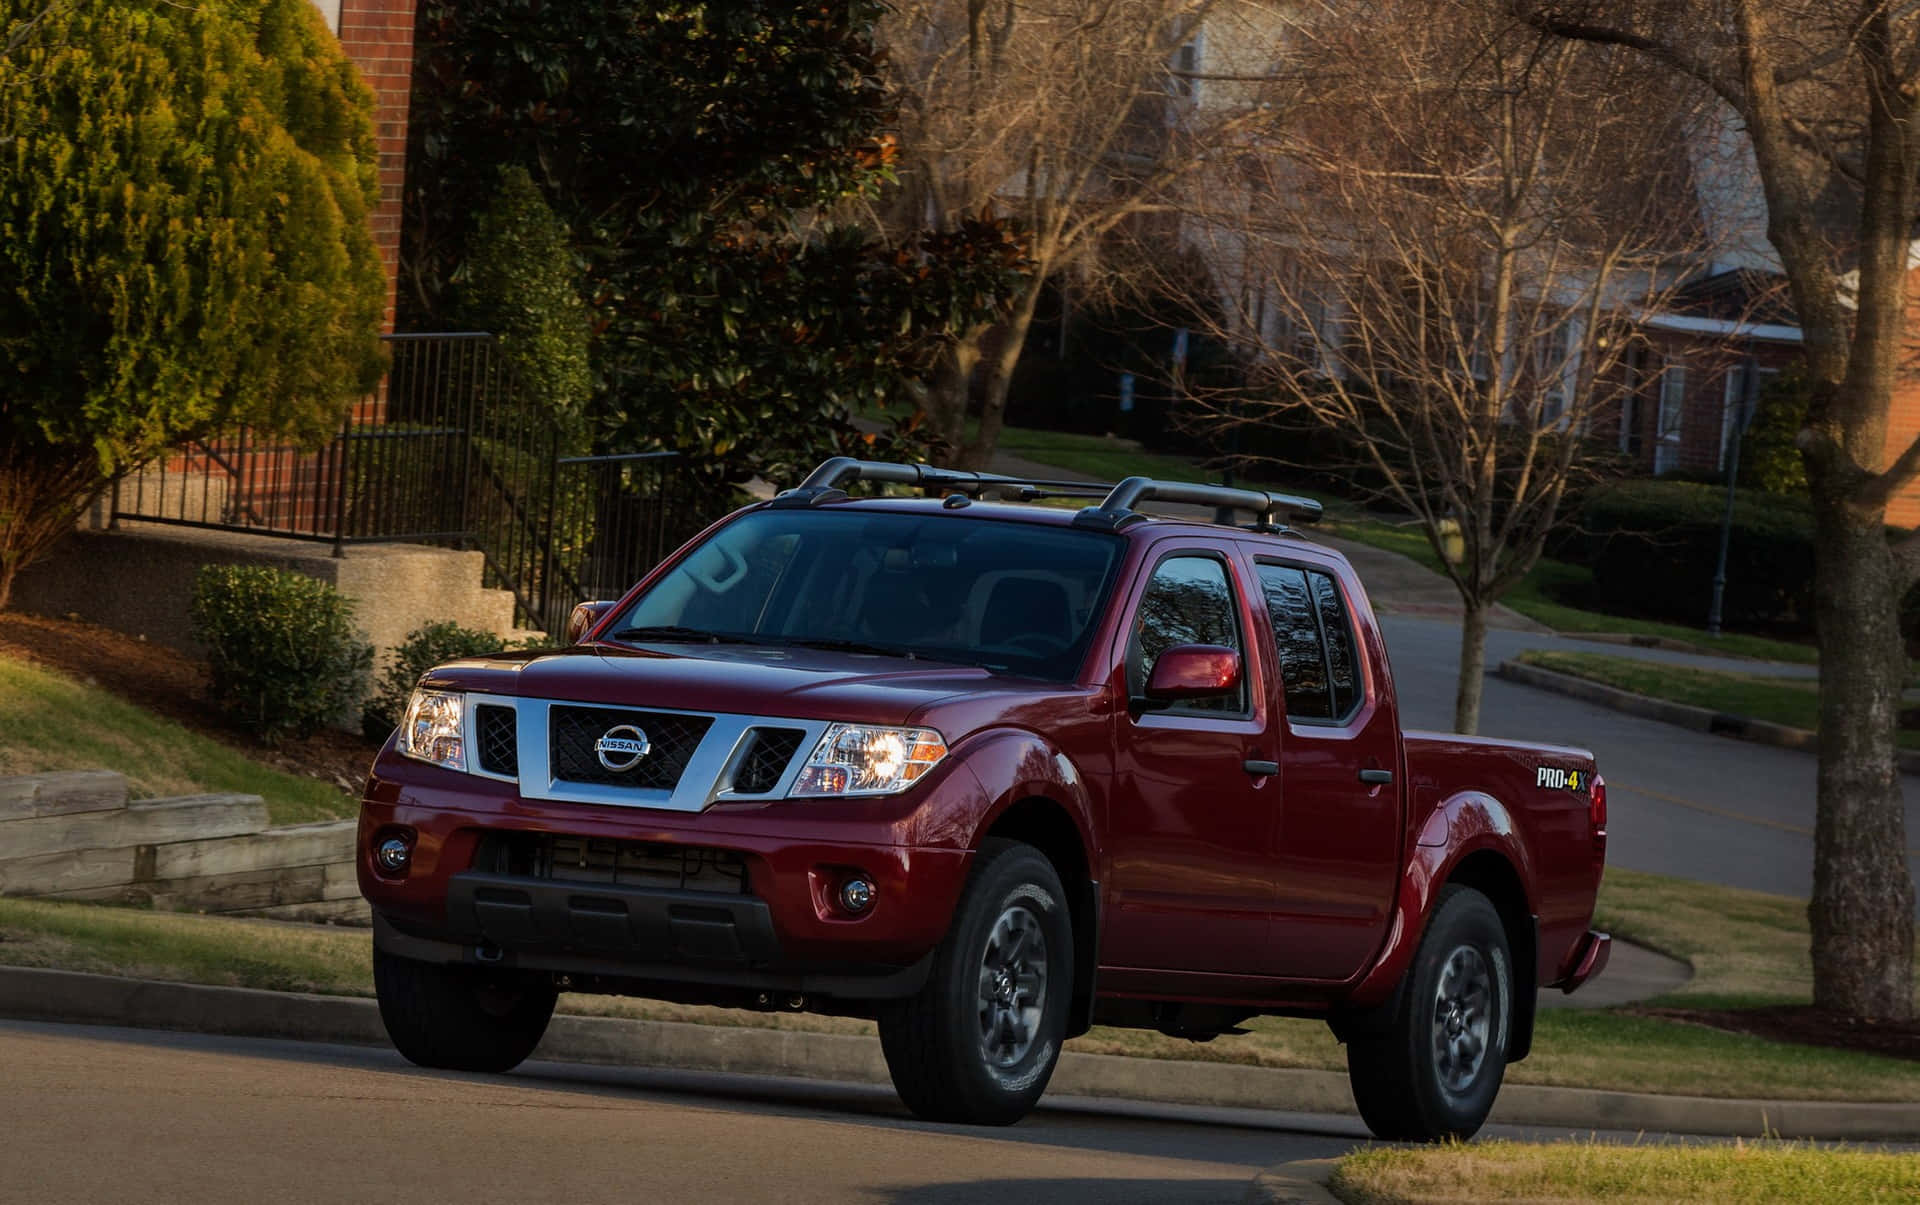 Nissan Frontier Dominating The Outdoor Landscape. Wallpaper